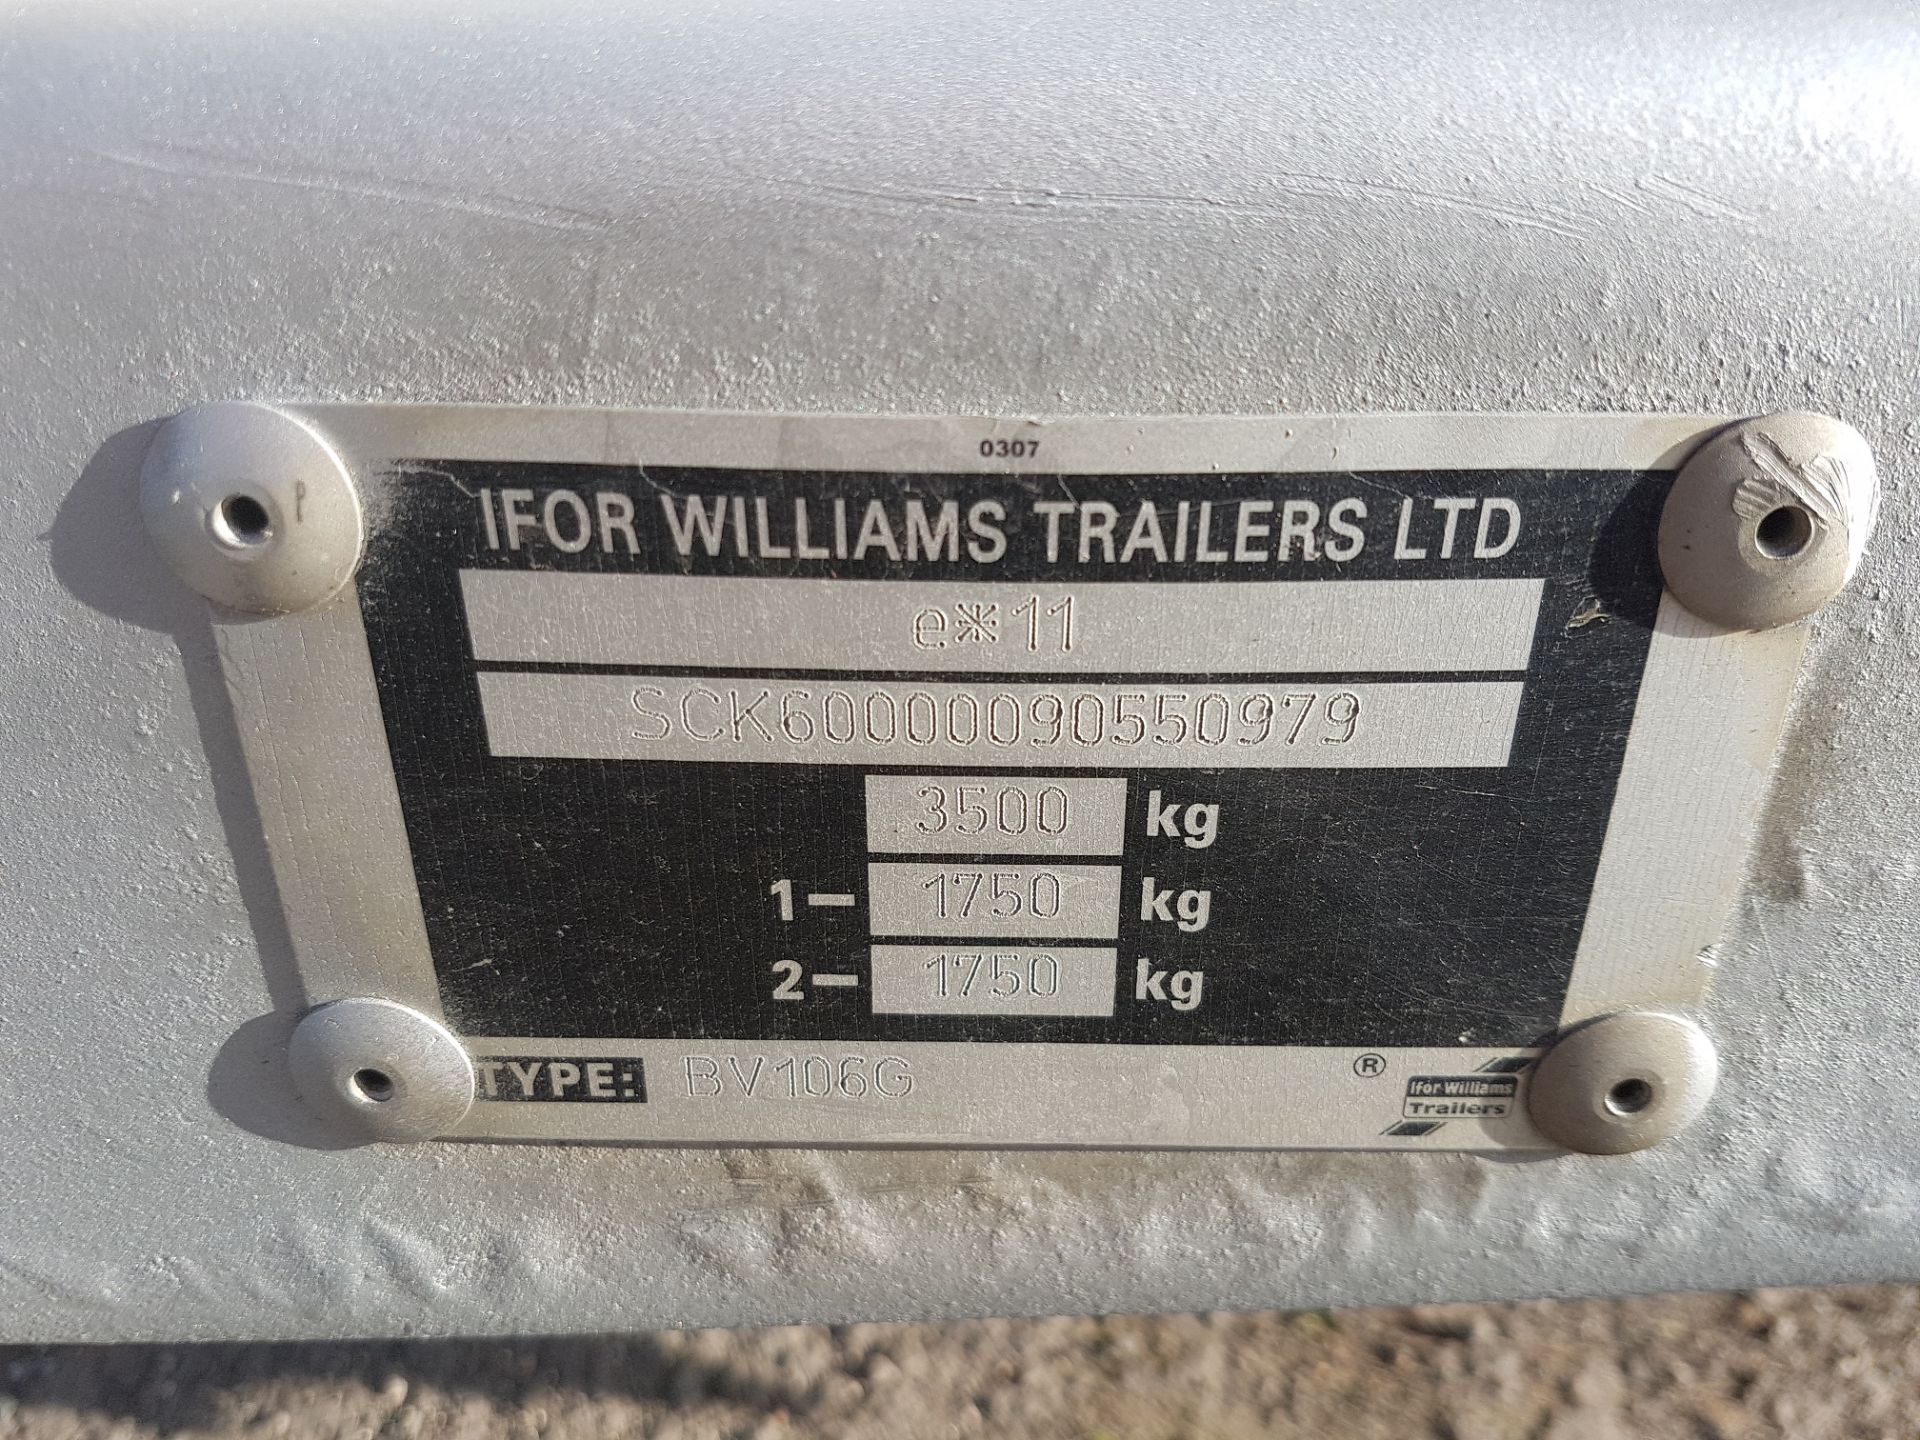 2009 IFOR WILLIAMS TWIN AXLE BV 106G BOX TRAILER 3.5 TONNE GROSS  IN GOOD ORDER SERIAL NUMBER: - Image 9 of 18